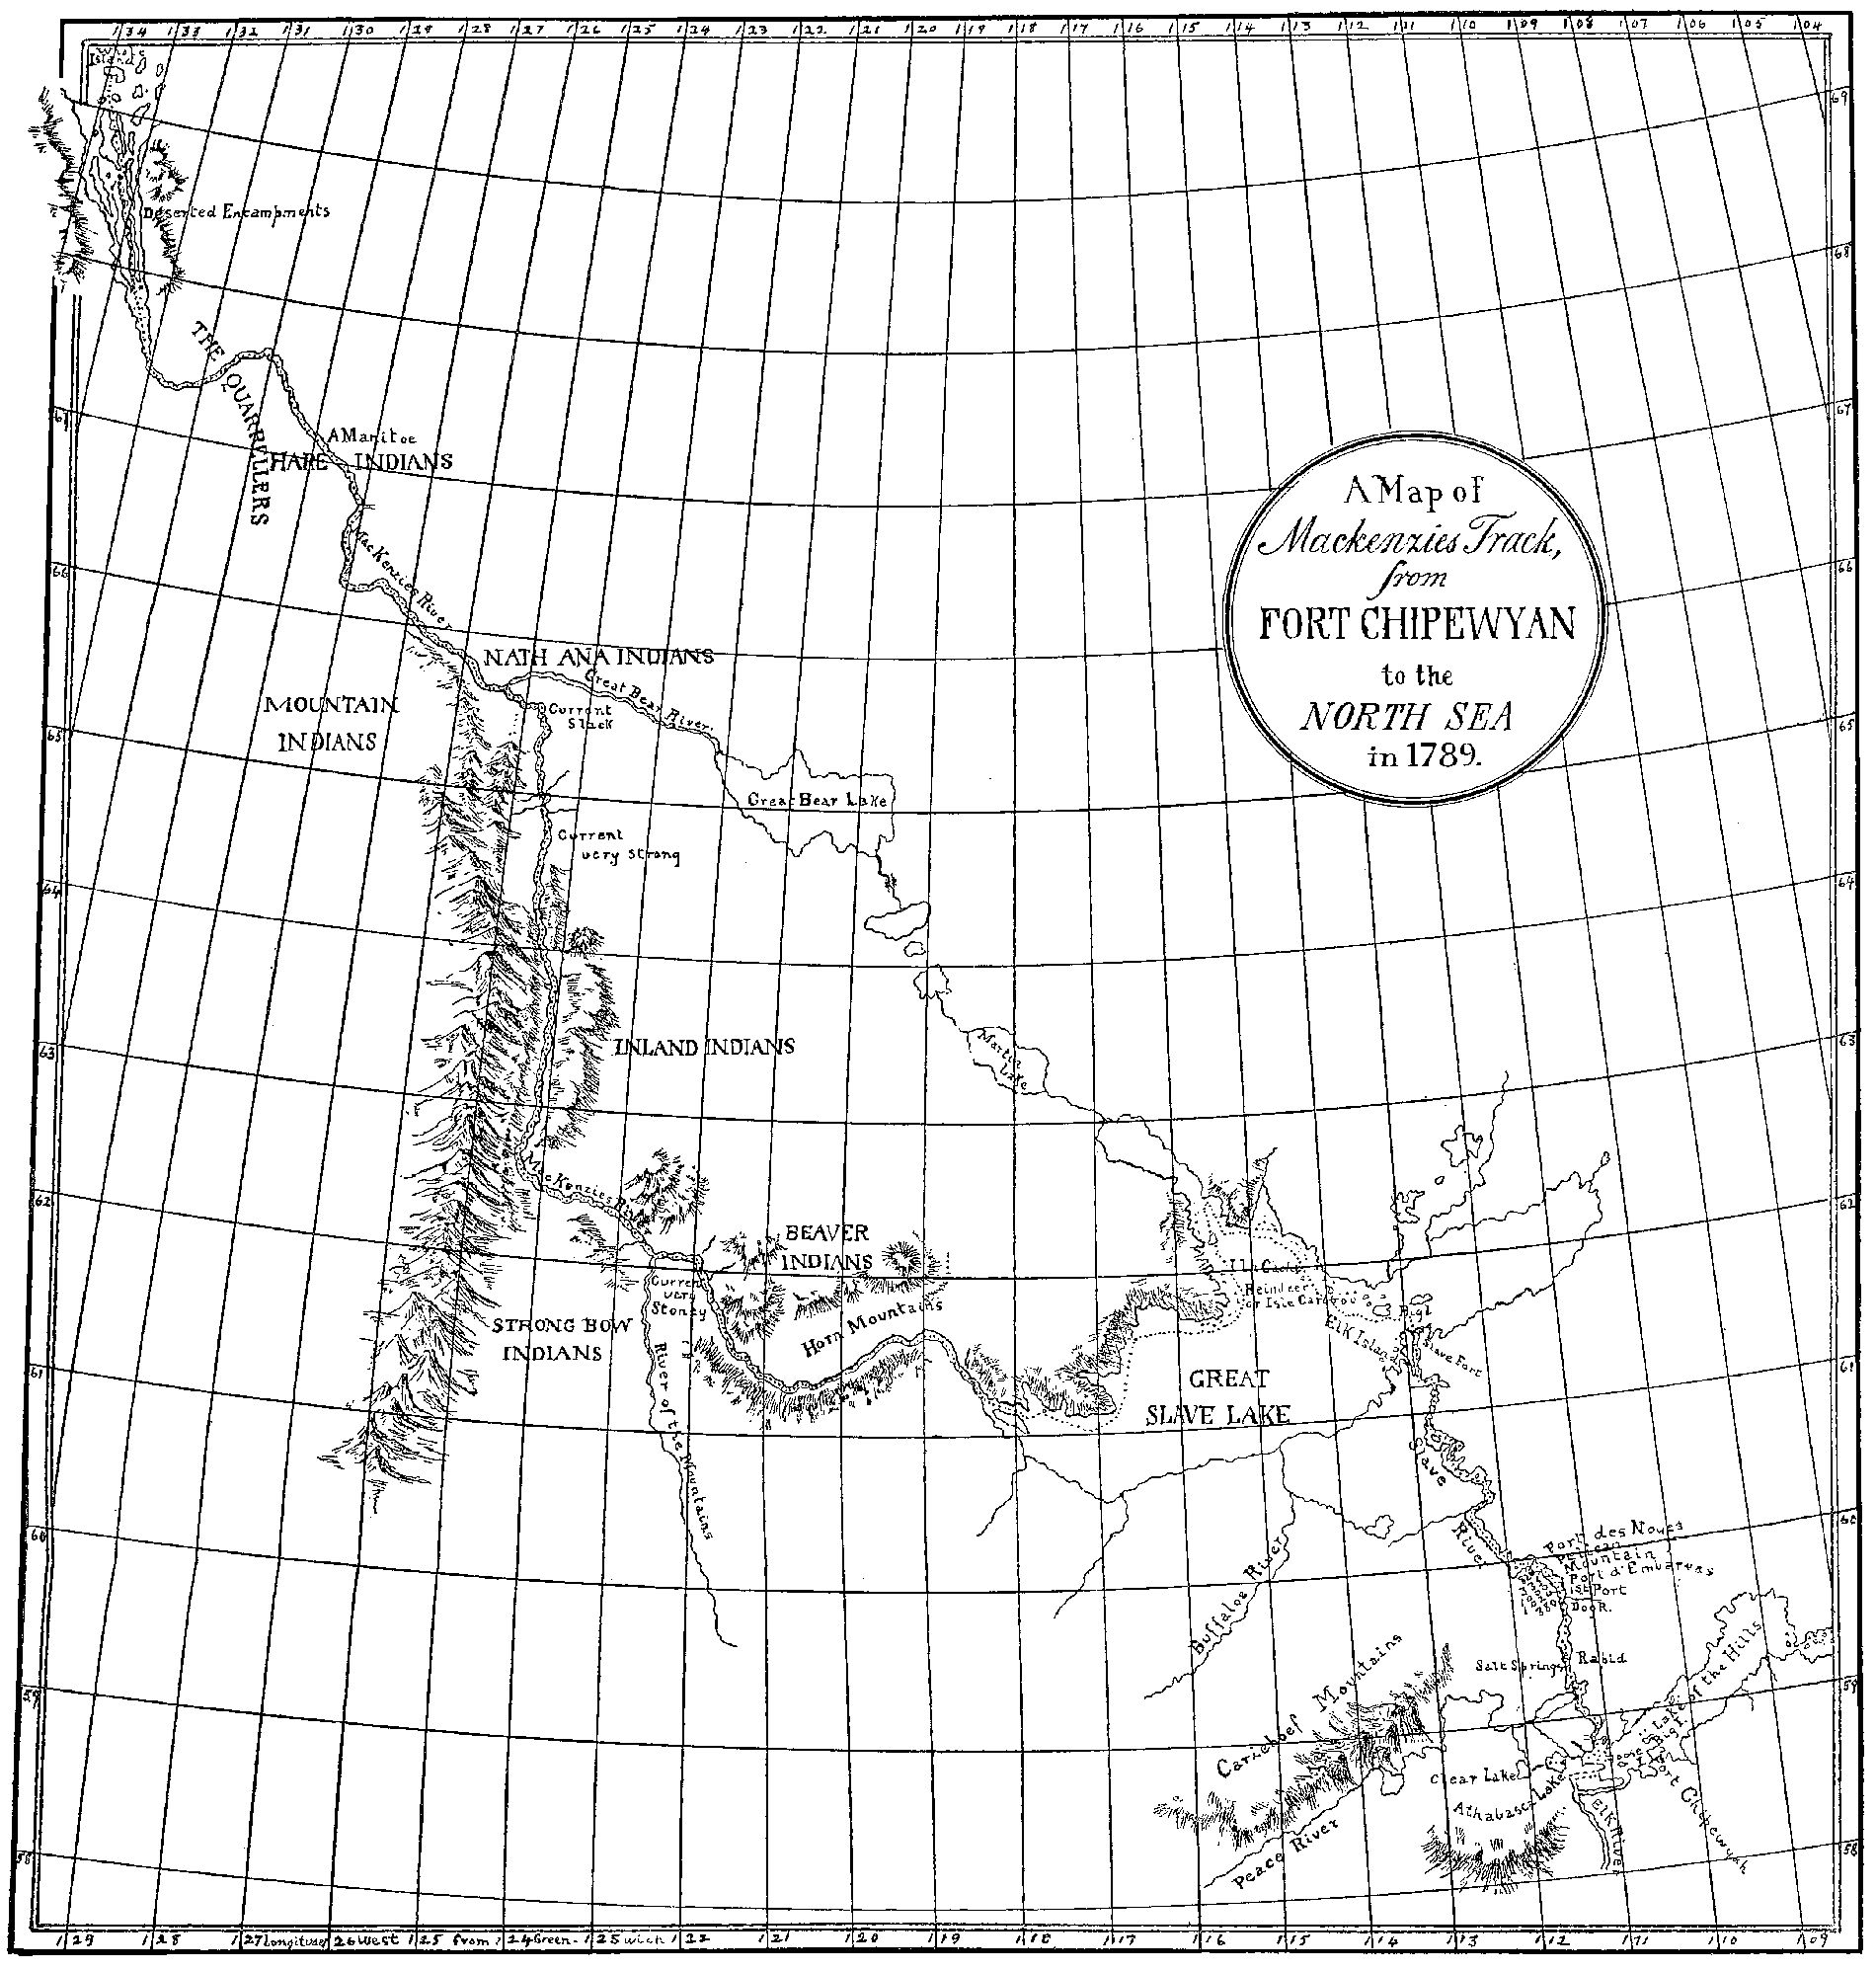 Map of Expedition North